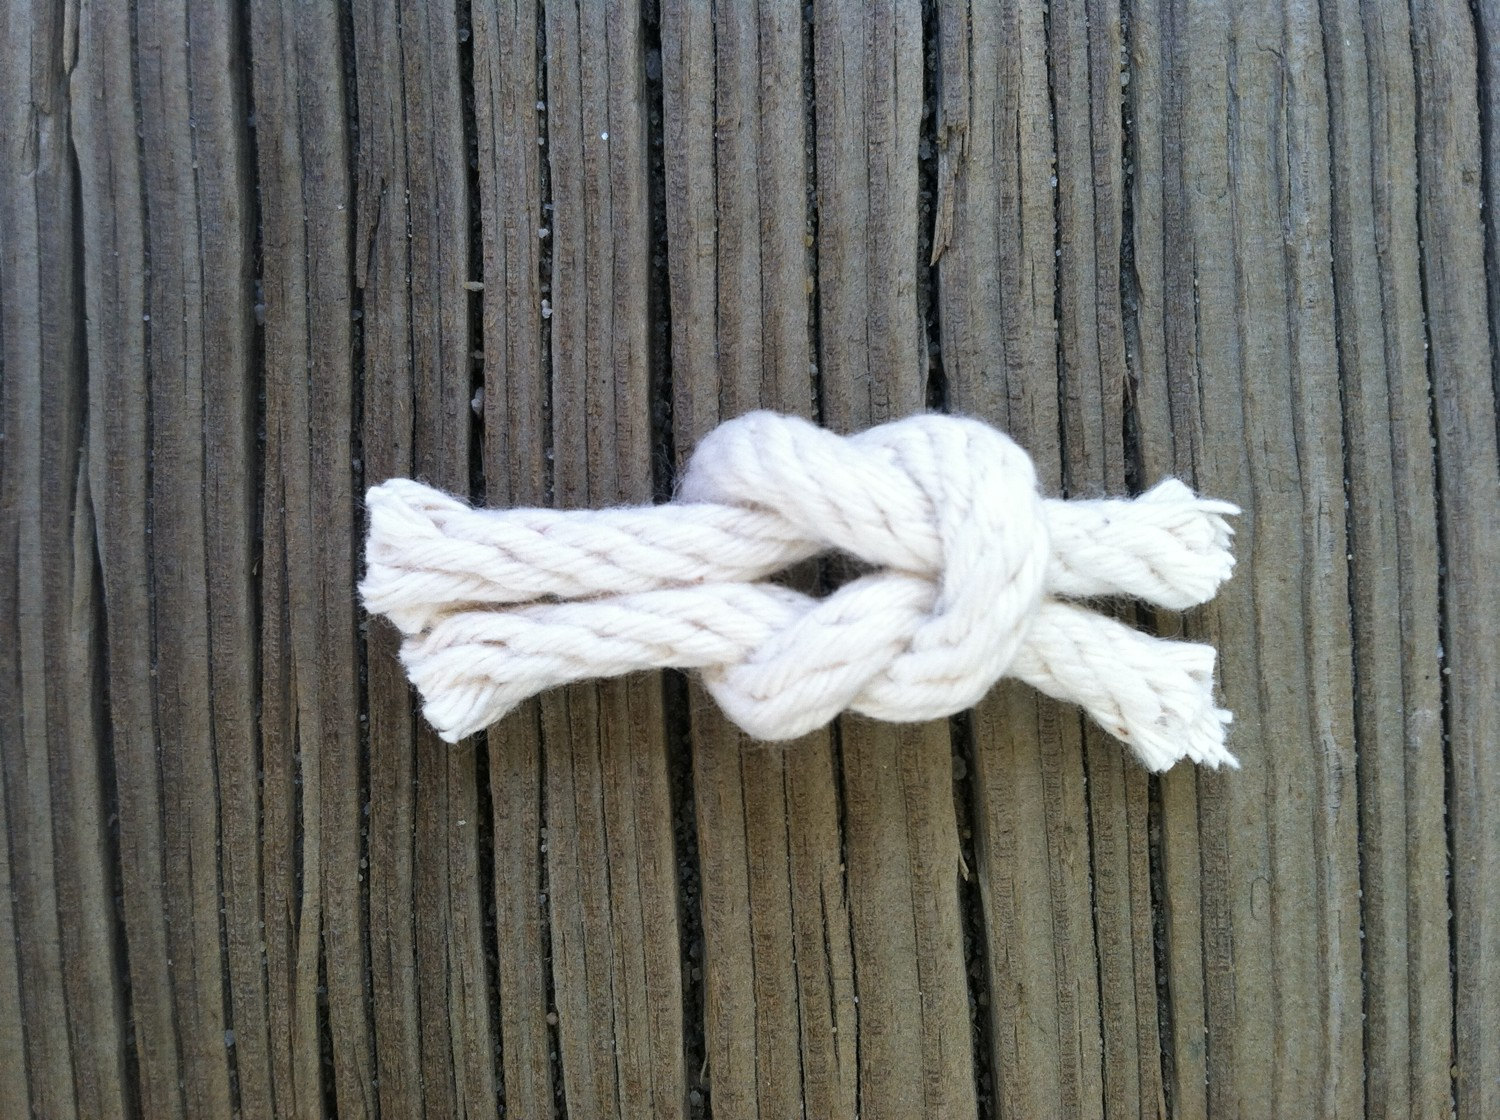 3/16 Cotton Rope By the Yard - 10 Yards - 100% Cotton Rope By The Yard -  3/16 Cotton Rope — The Mountain Thread Company (TM)